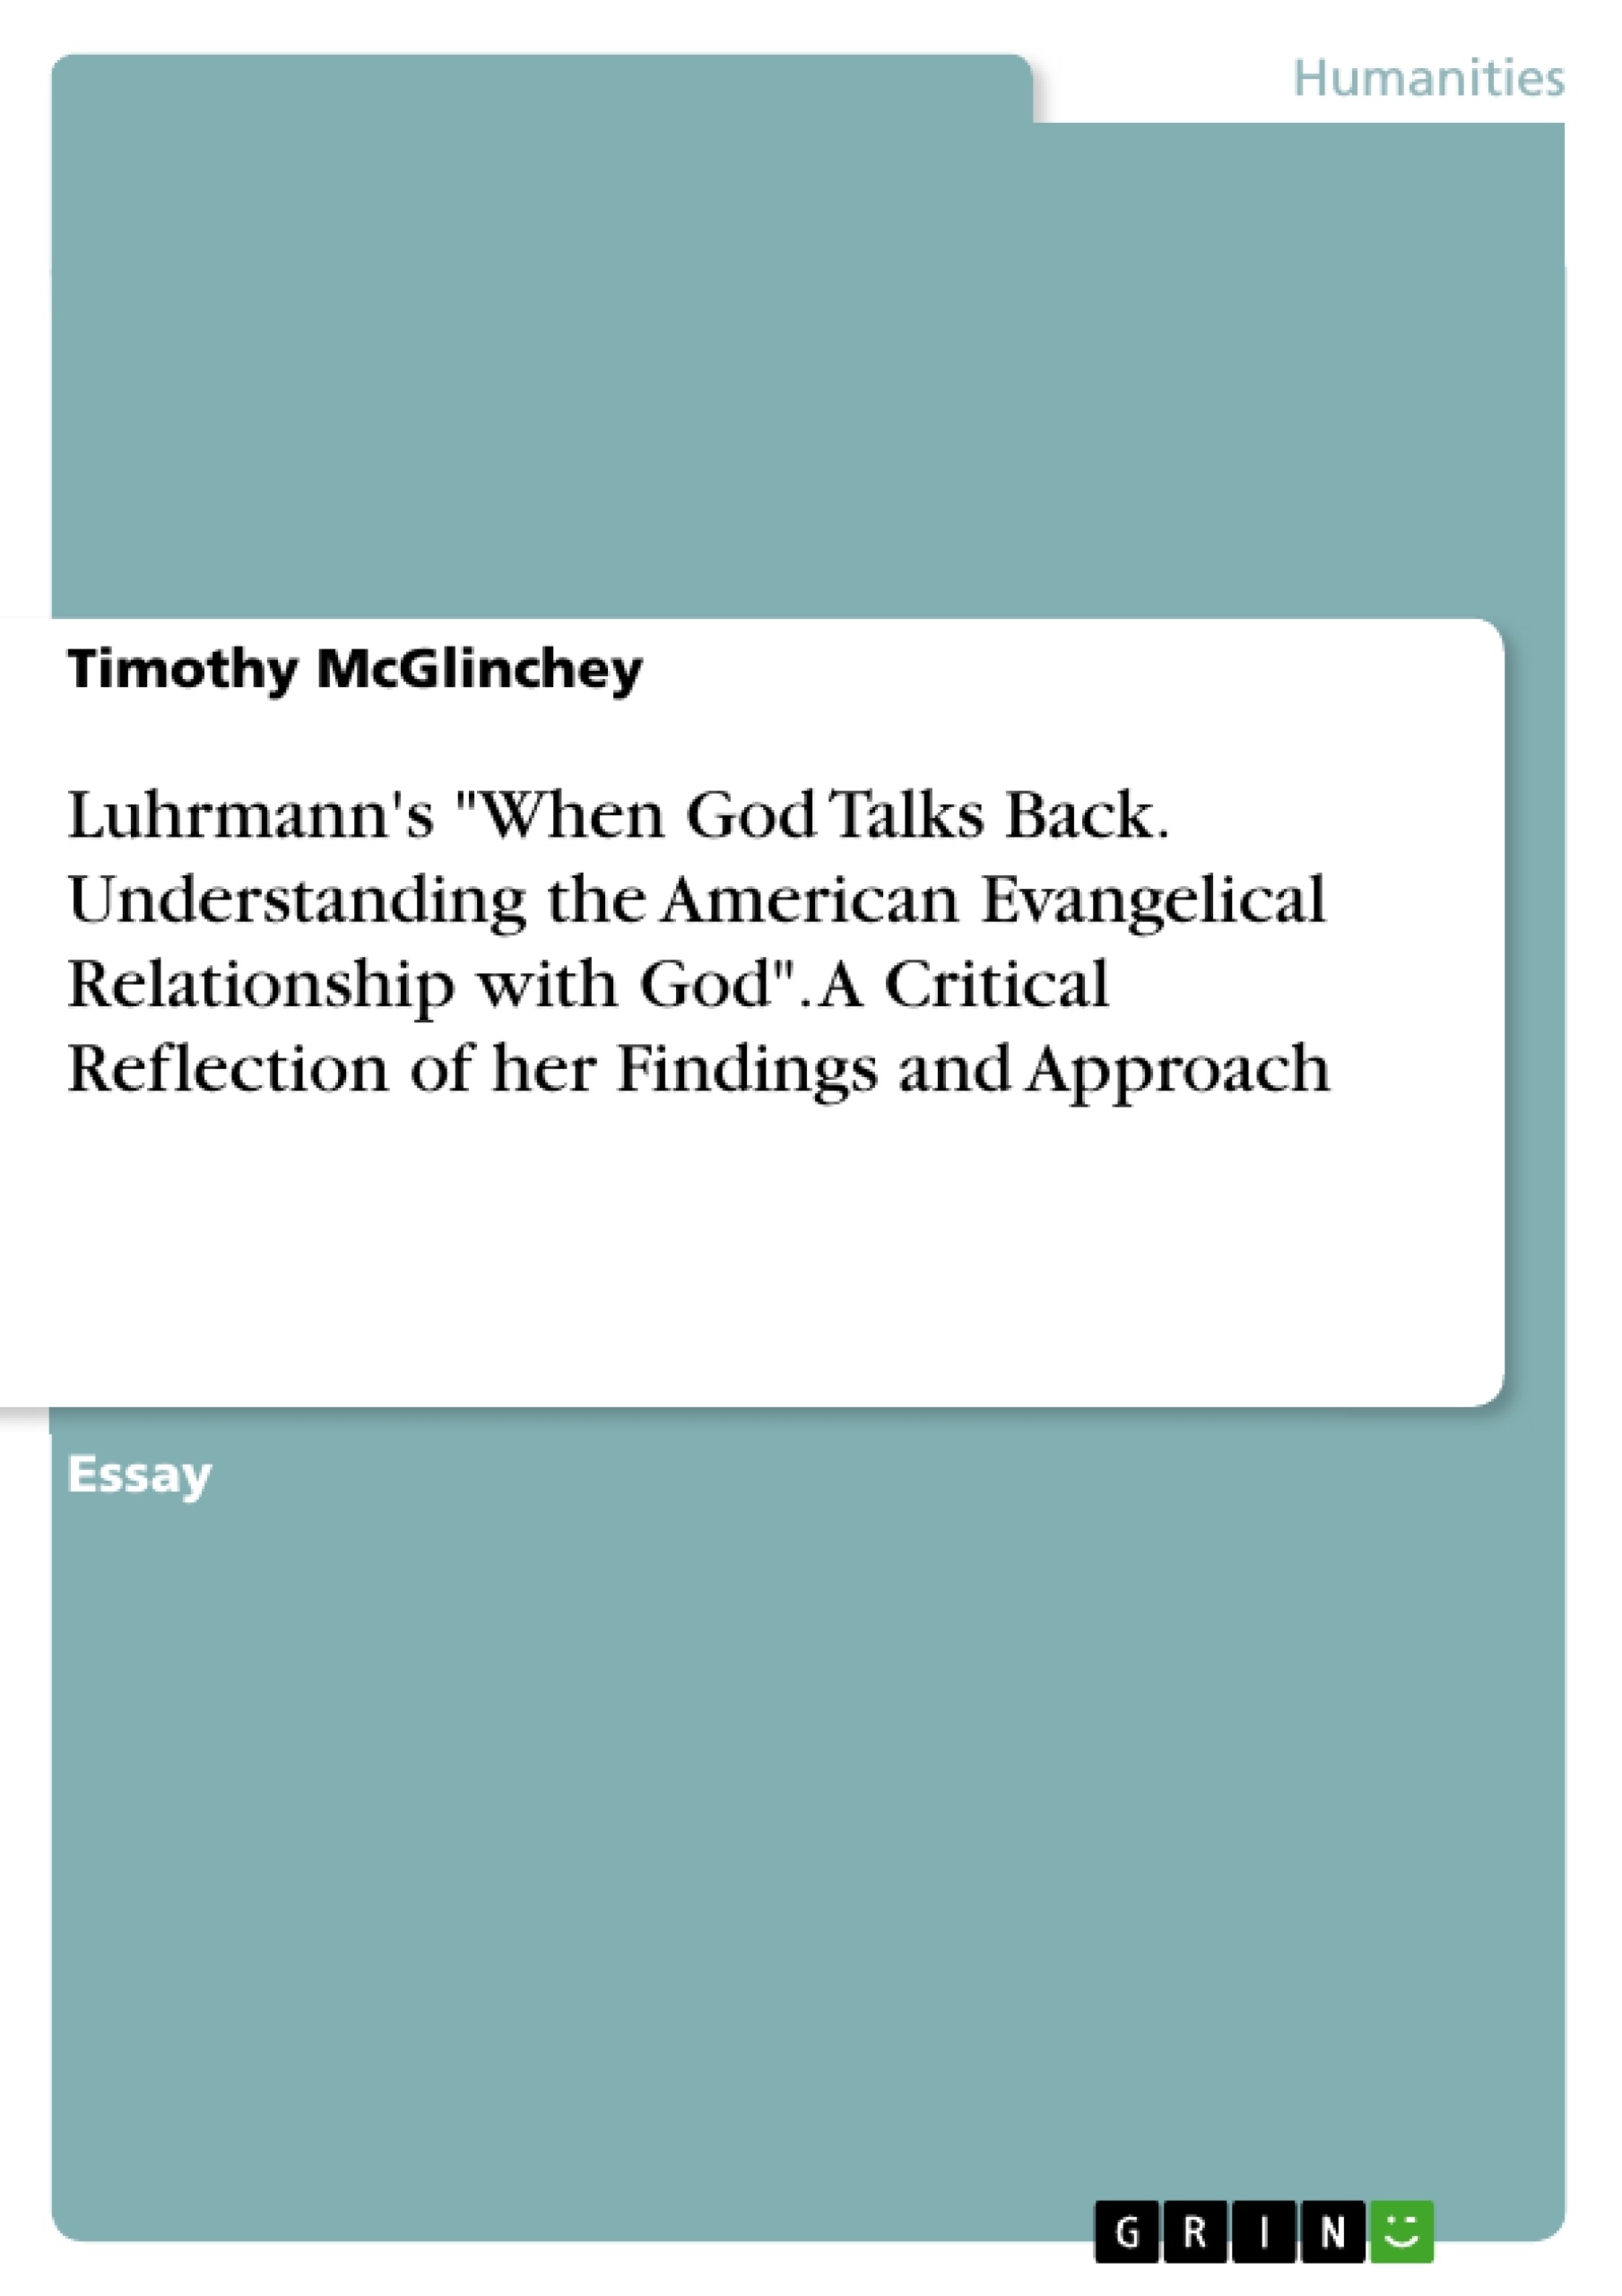 Titre: Luhrmann's "When God Talks Back. Understanding the American Evangelical Relationship with God". A Critical Reflection of her Findings and Approach